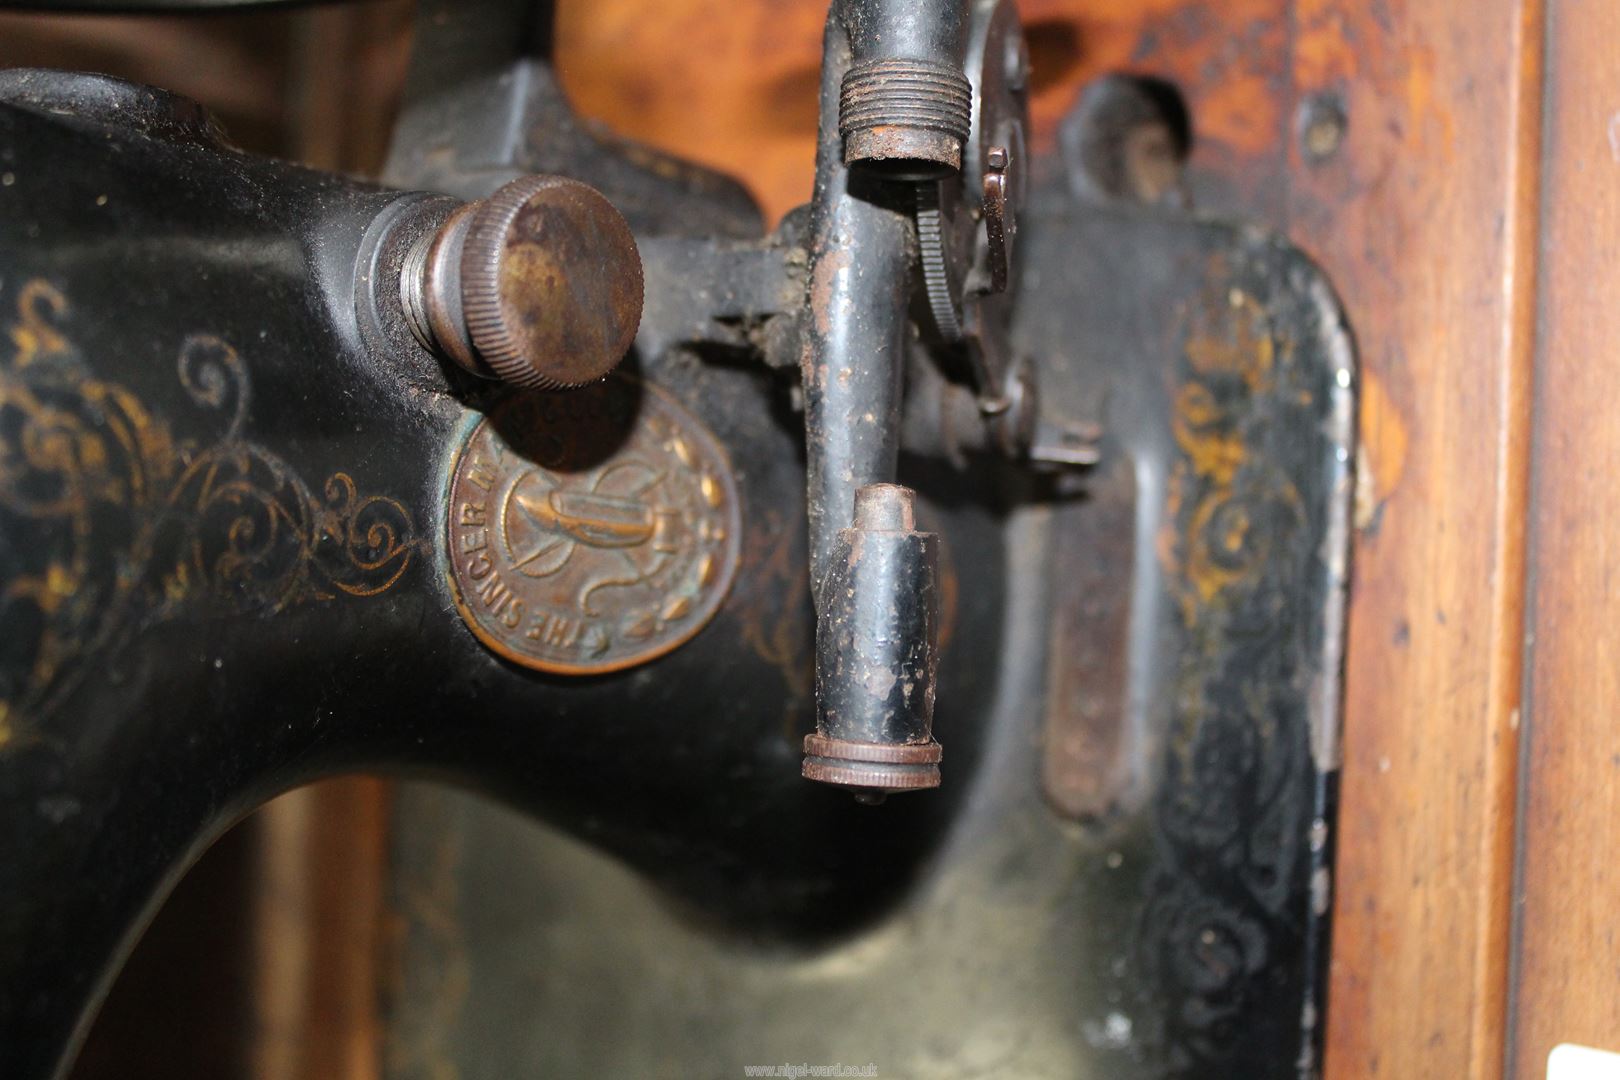 A hand Singer sewing machine in bentwood case. - Image 3 of 4